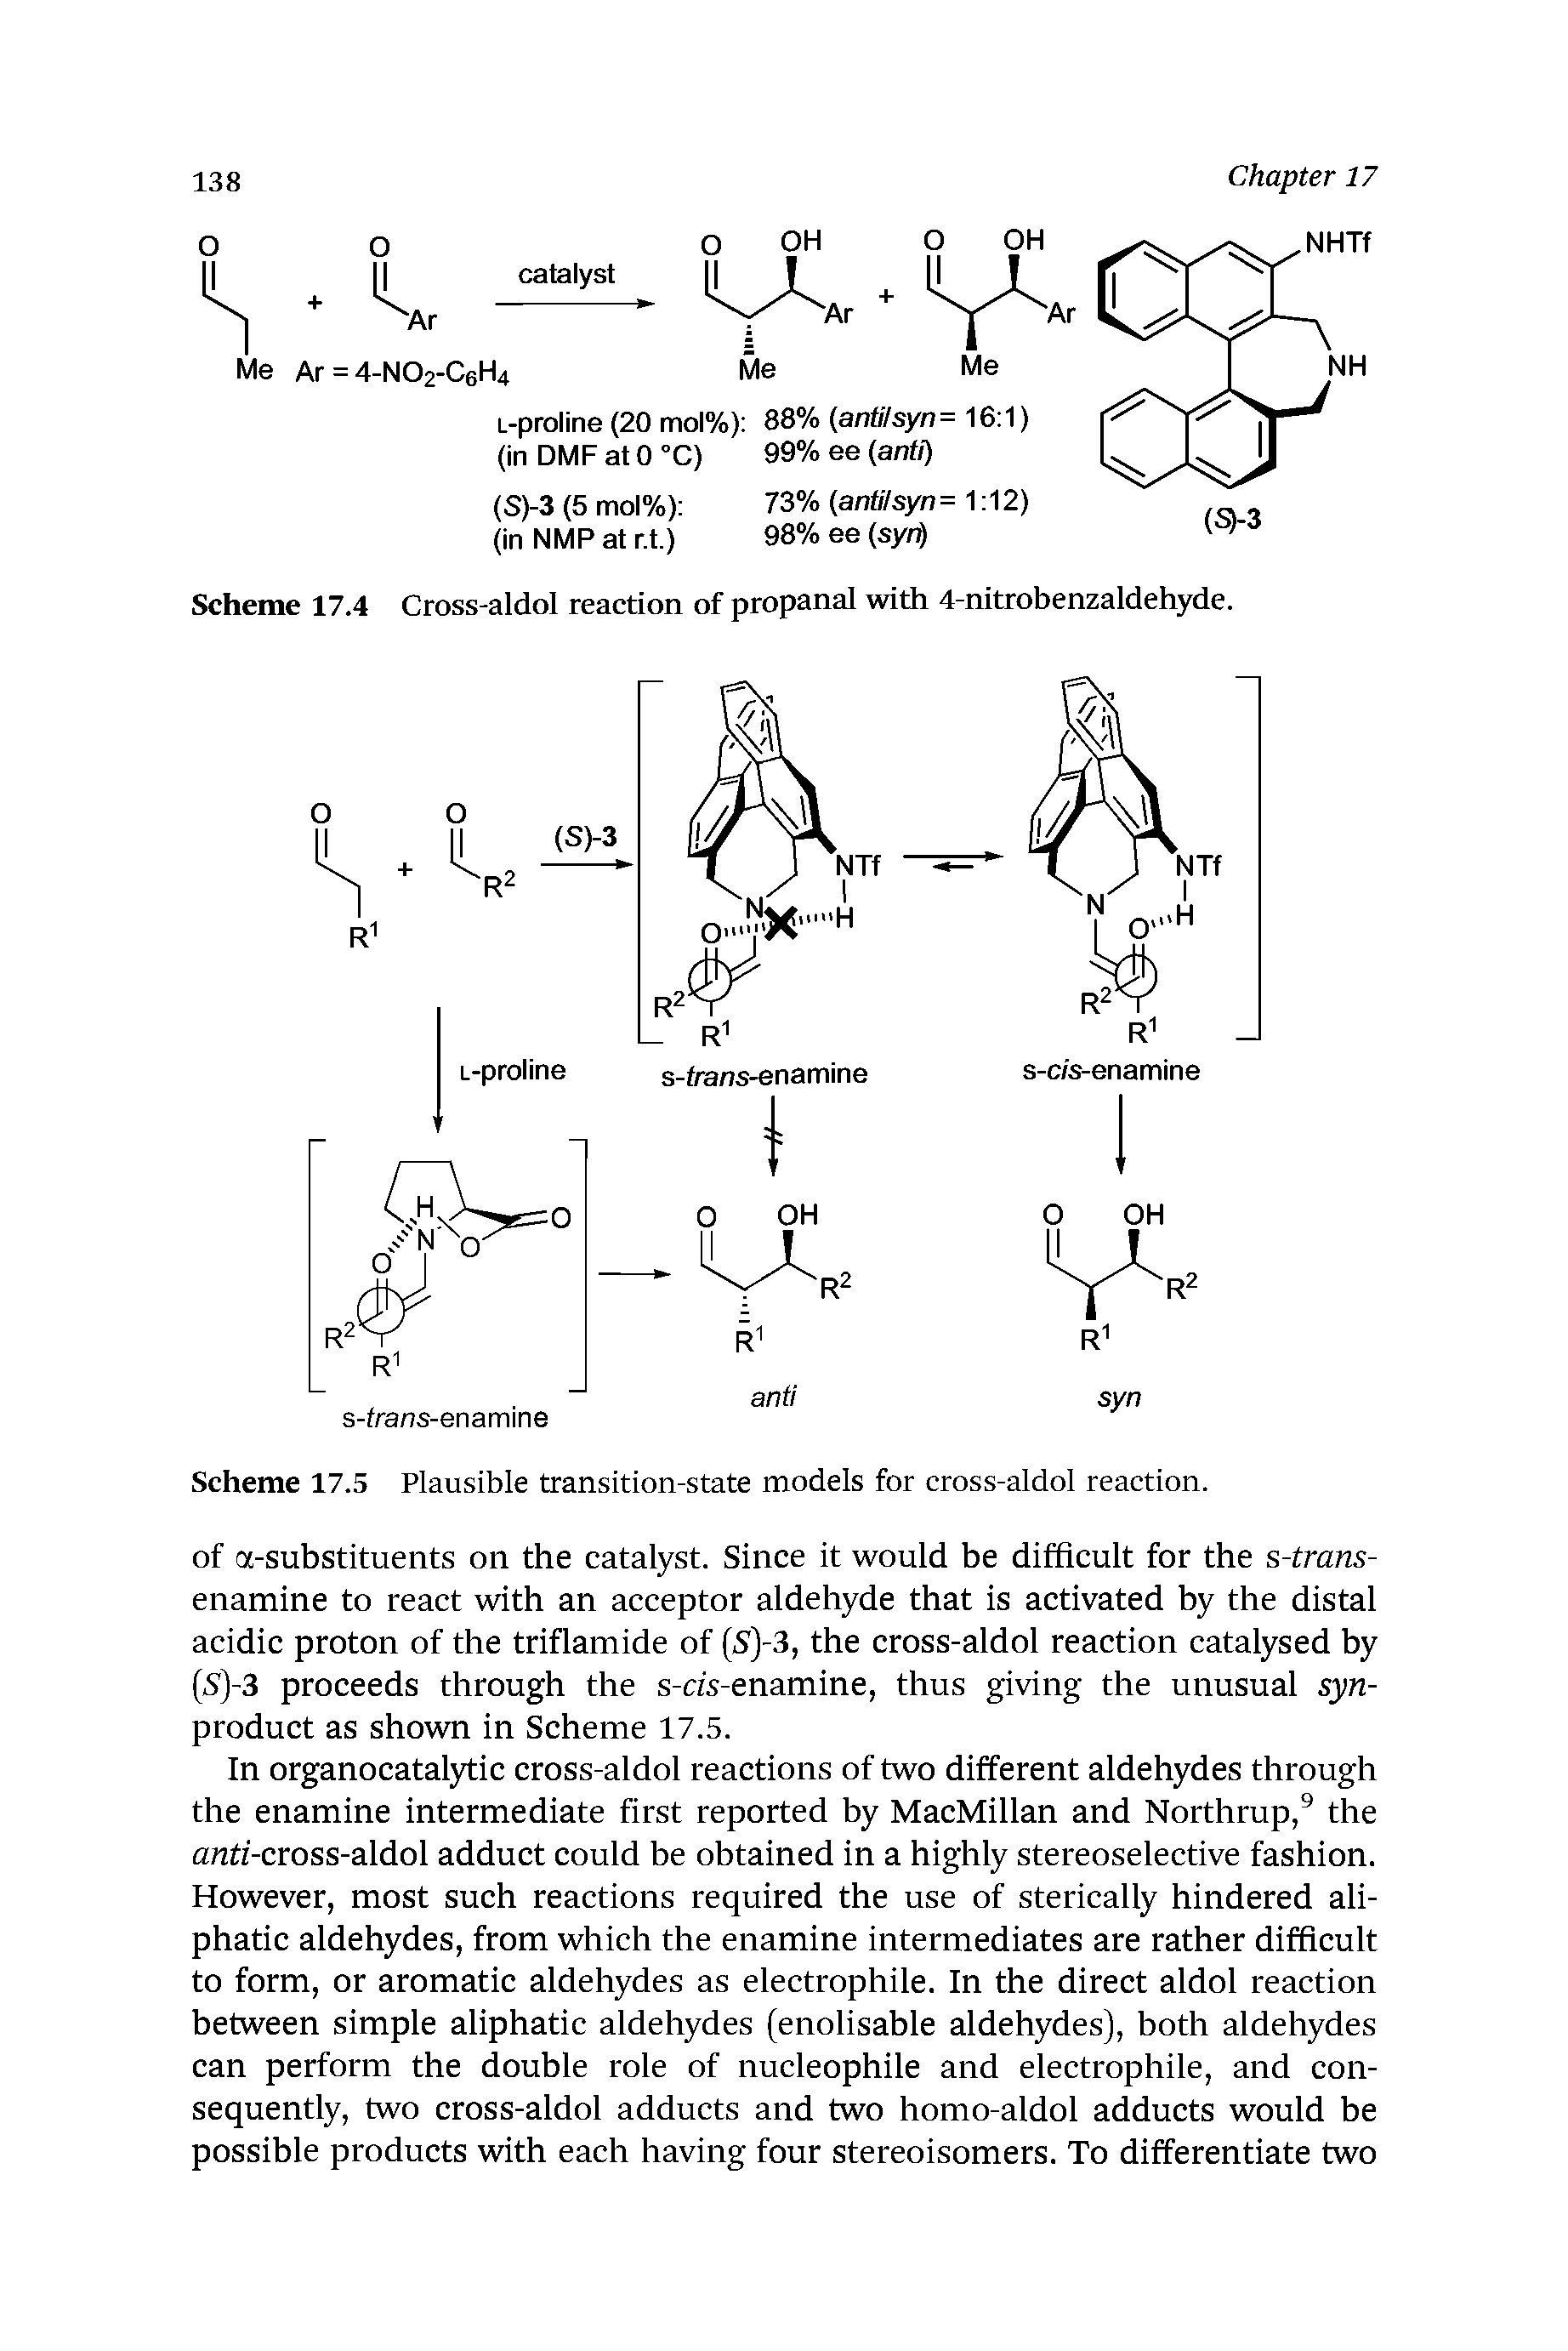 Scheme 17.5 Plausible transition-state models for cross-aldol reaction.